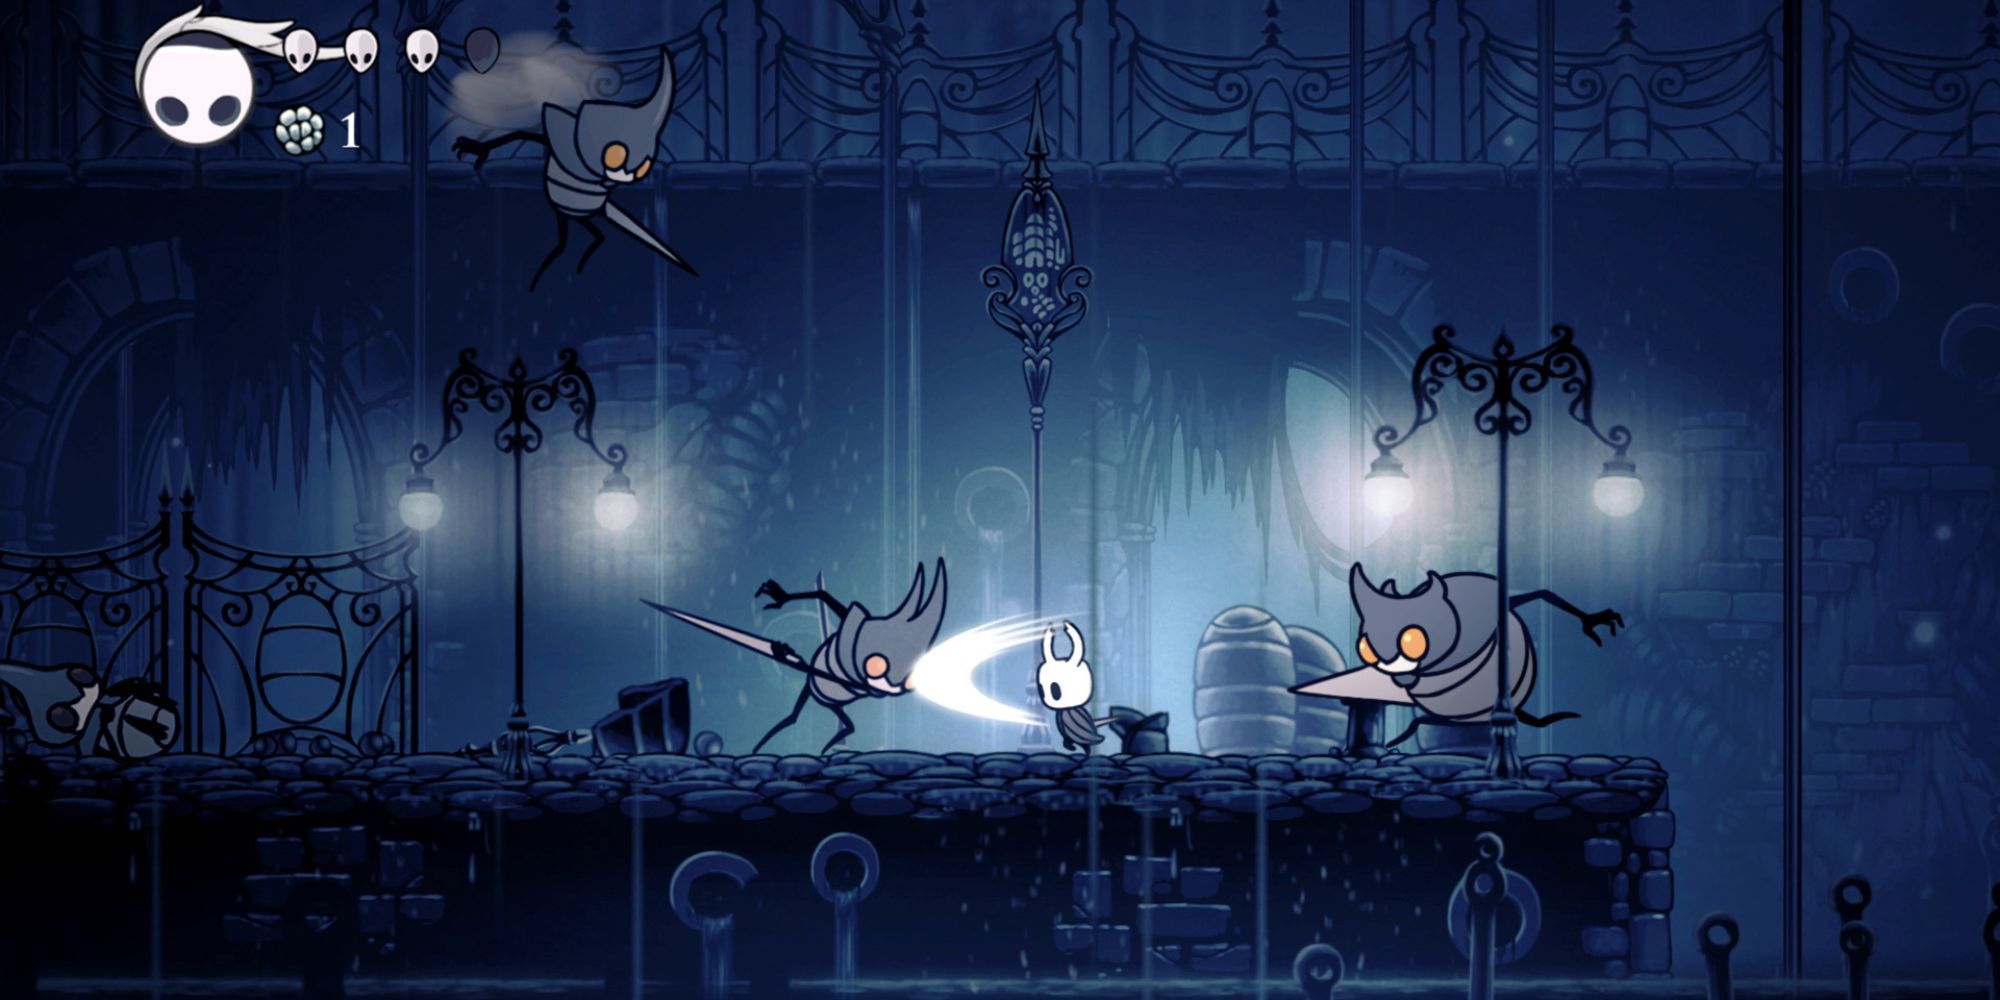 Hollow Knight attacks a group of enemies while it rains